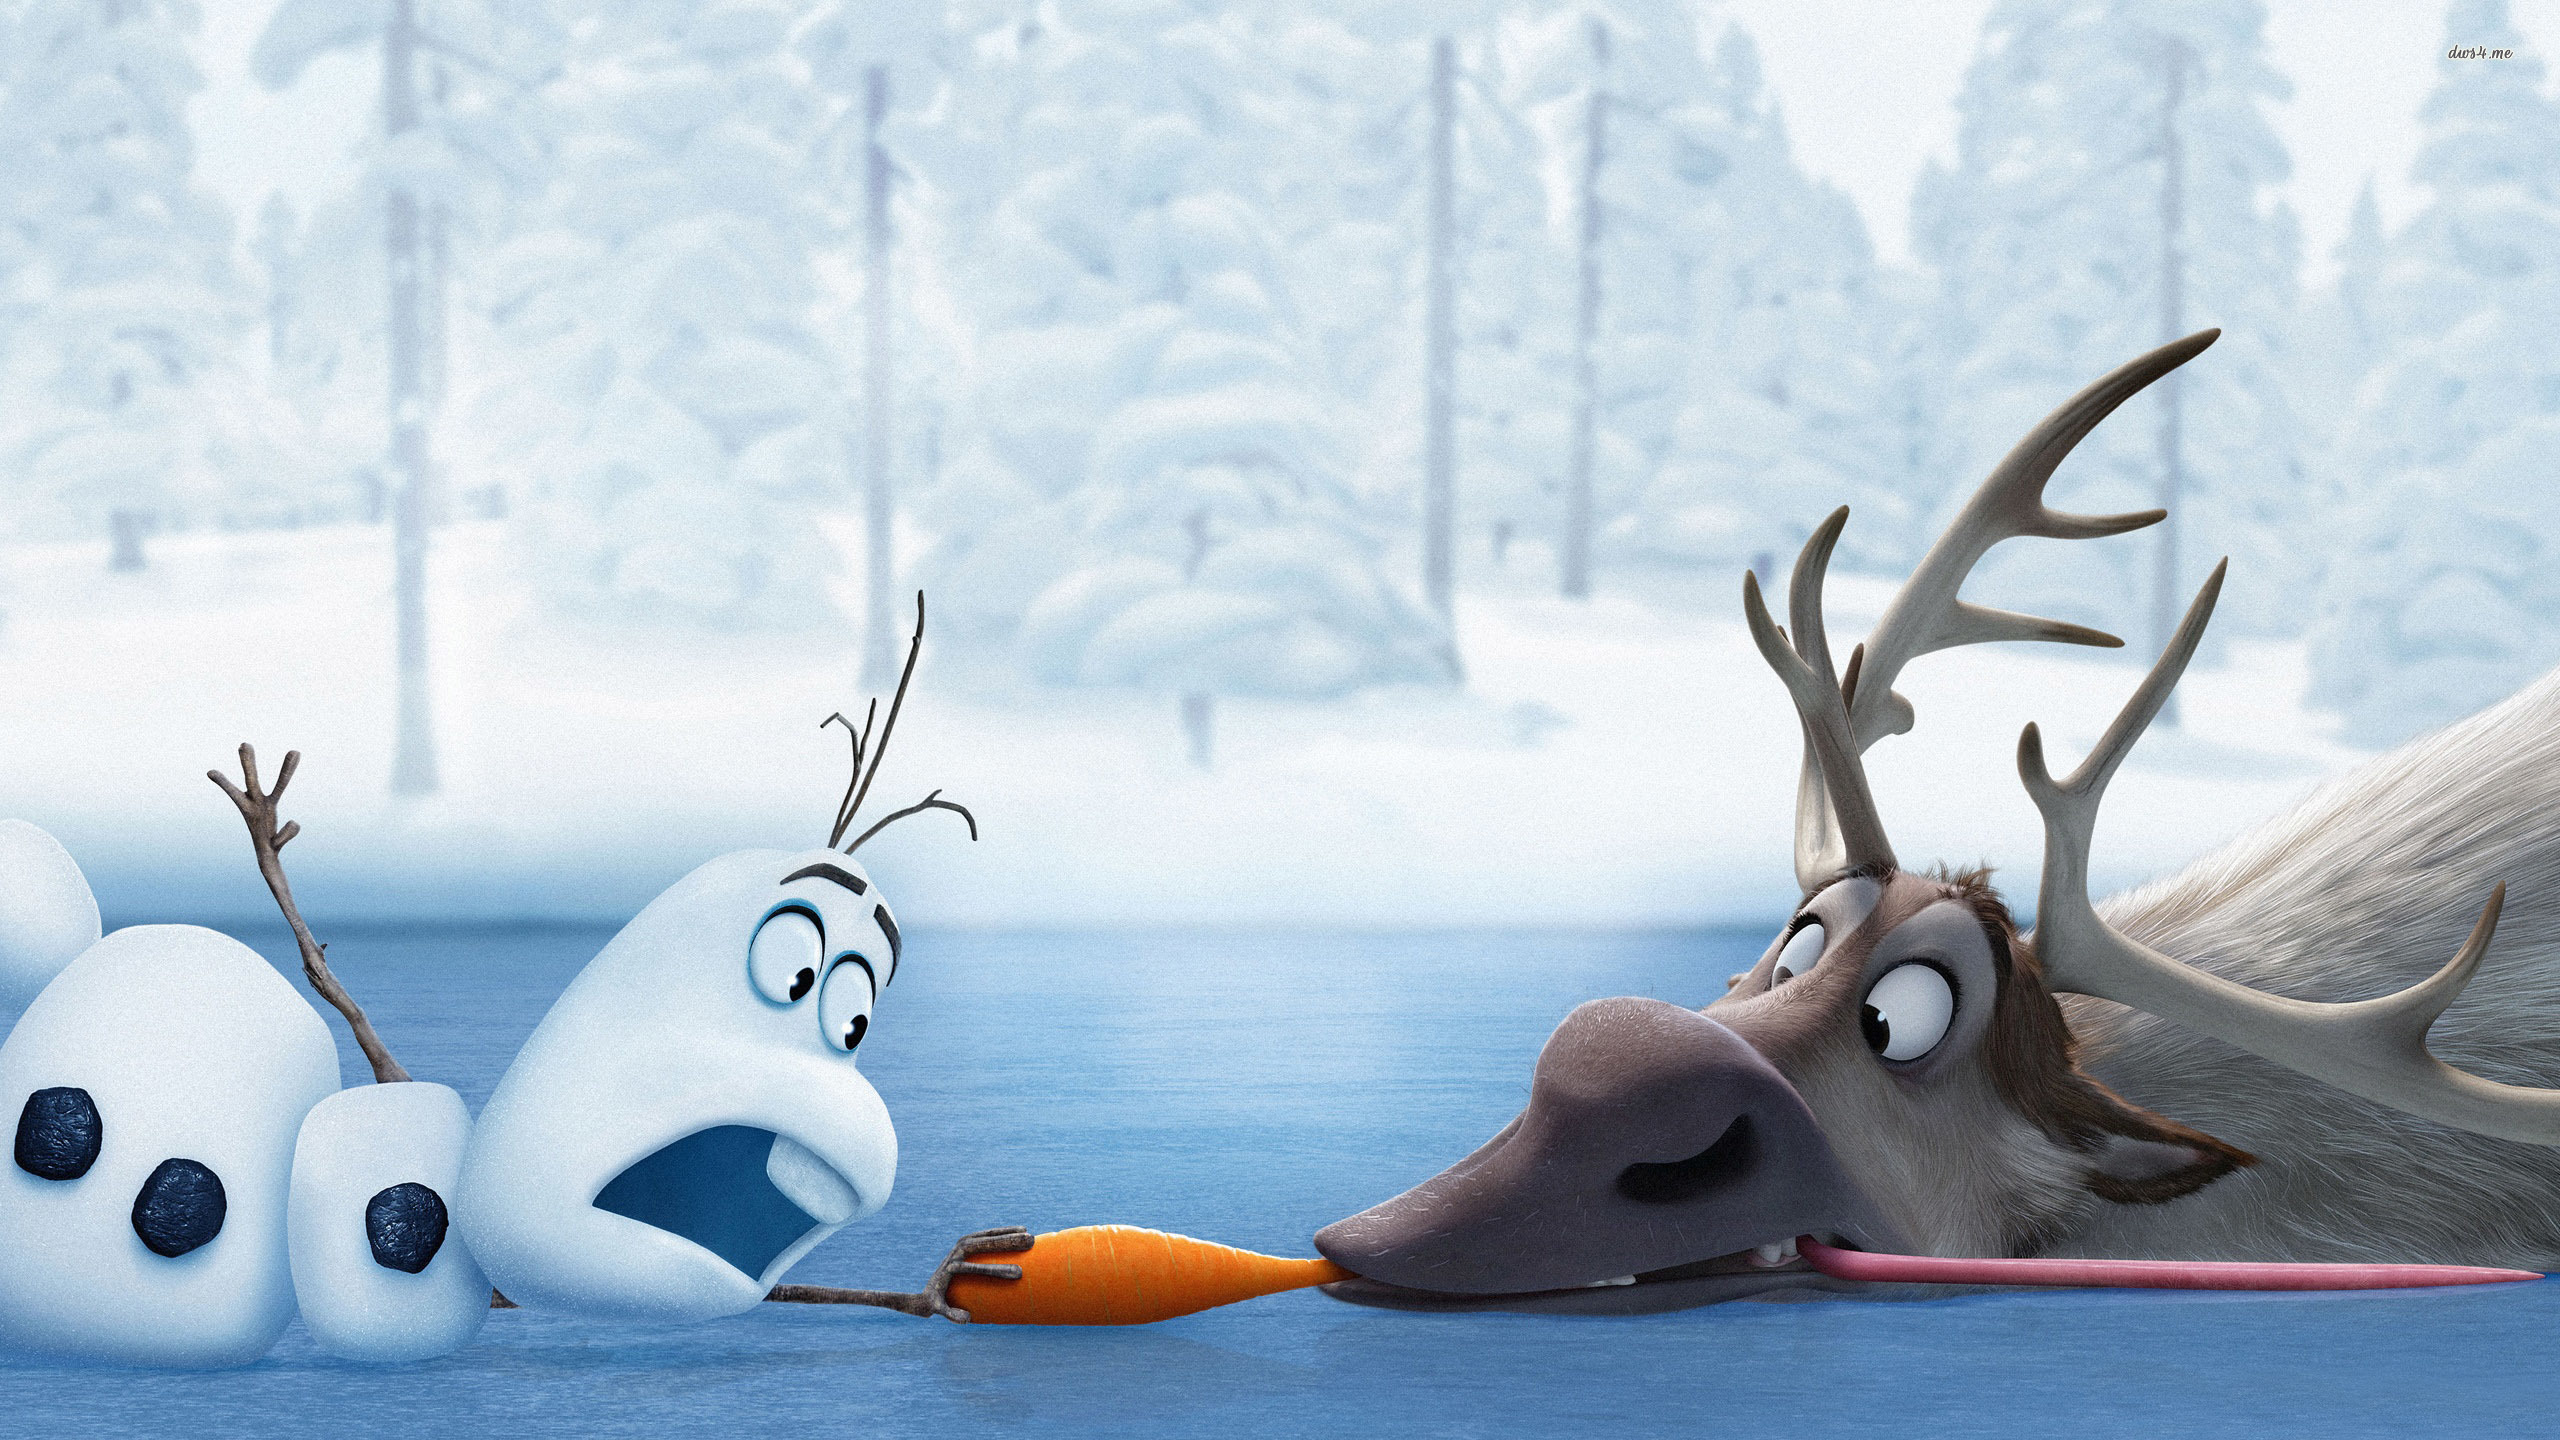 Olaf Holding On To The Carrot Wallpaper - Olaf Sven , HD Wallpaper & Backgrounds